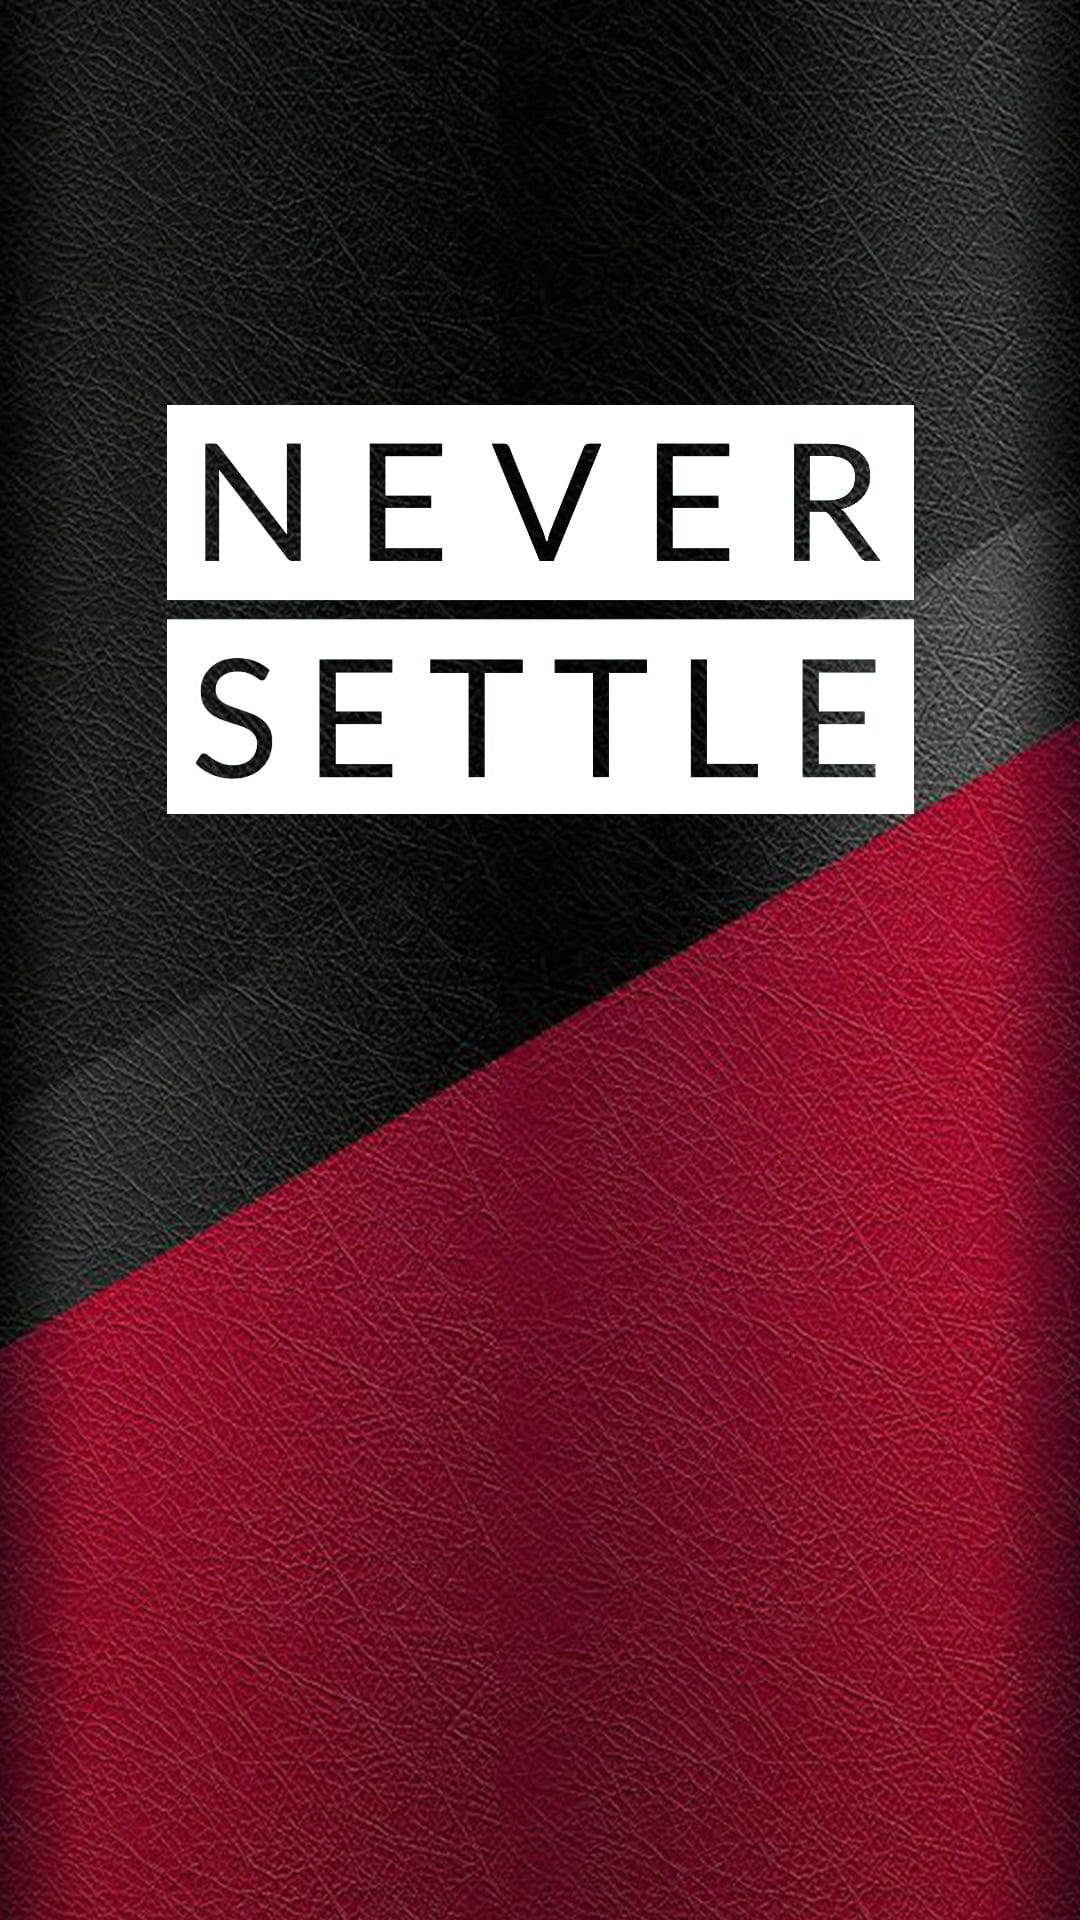 Oneplus Nord Never Settle Red Black Background